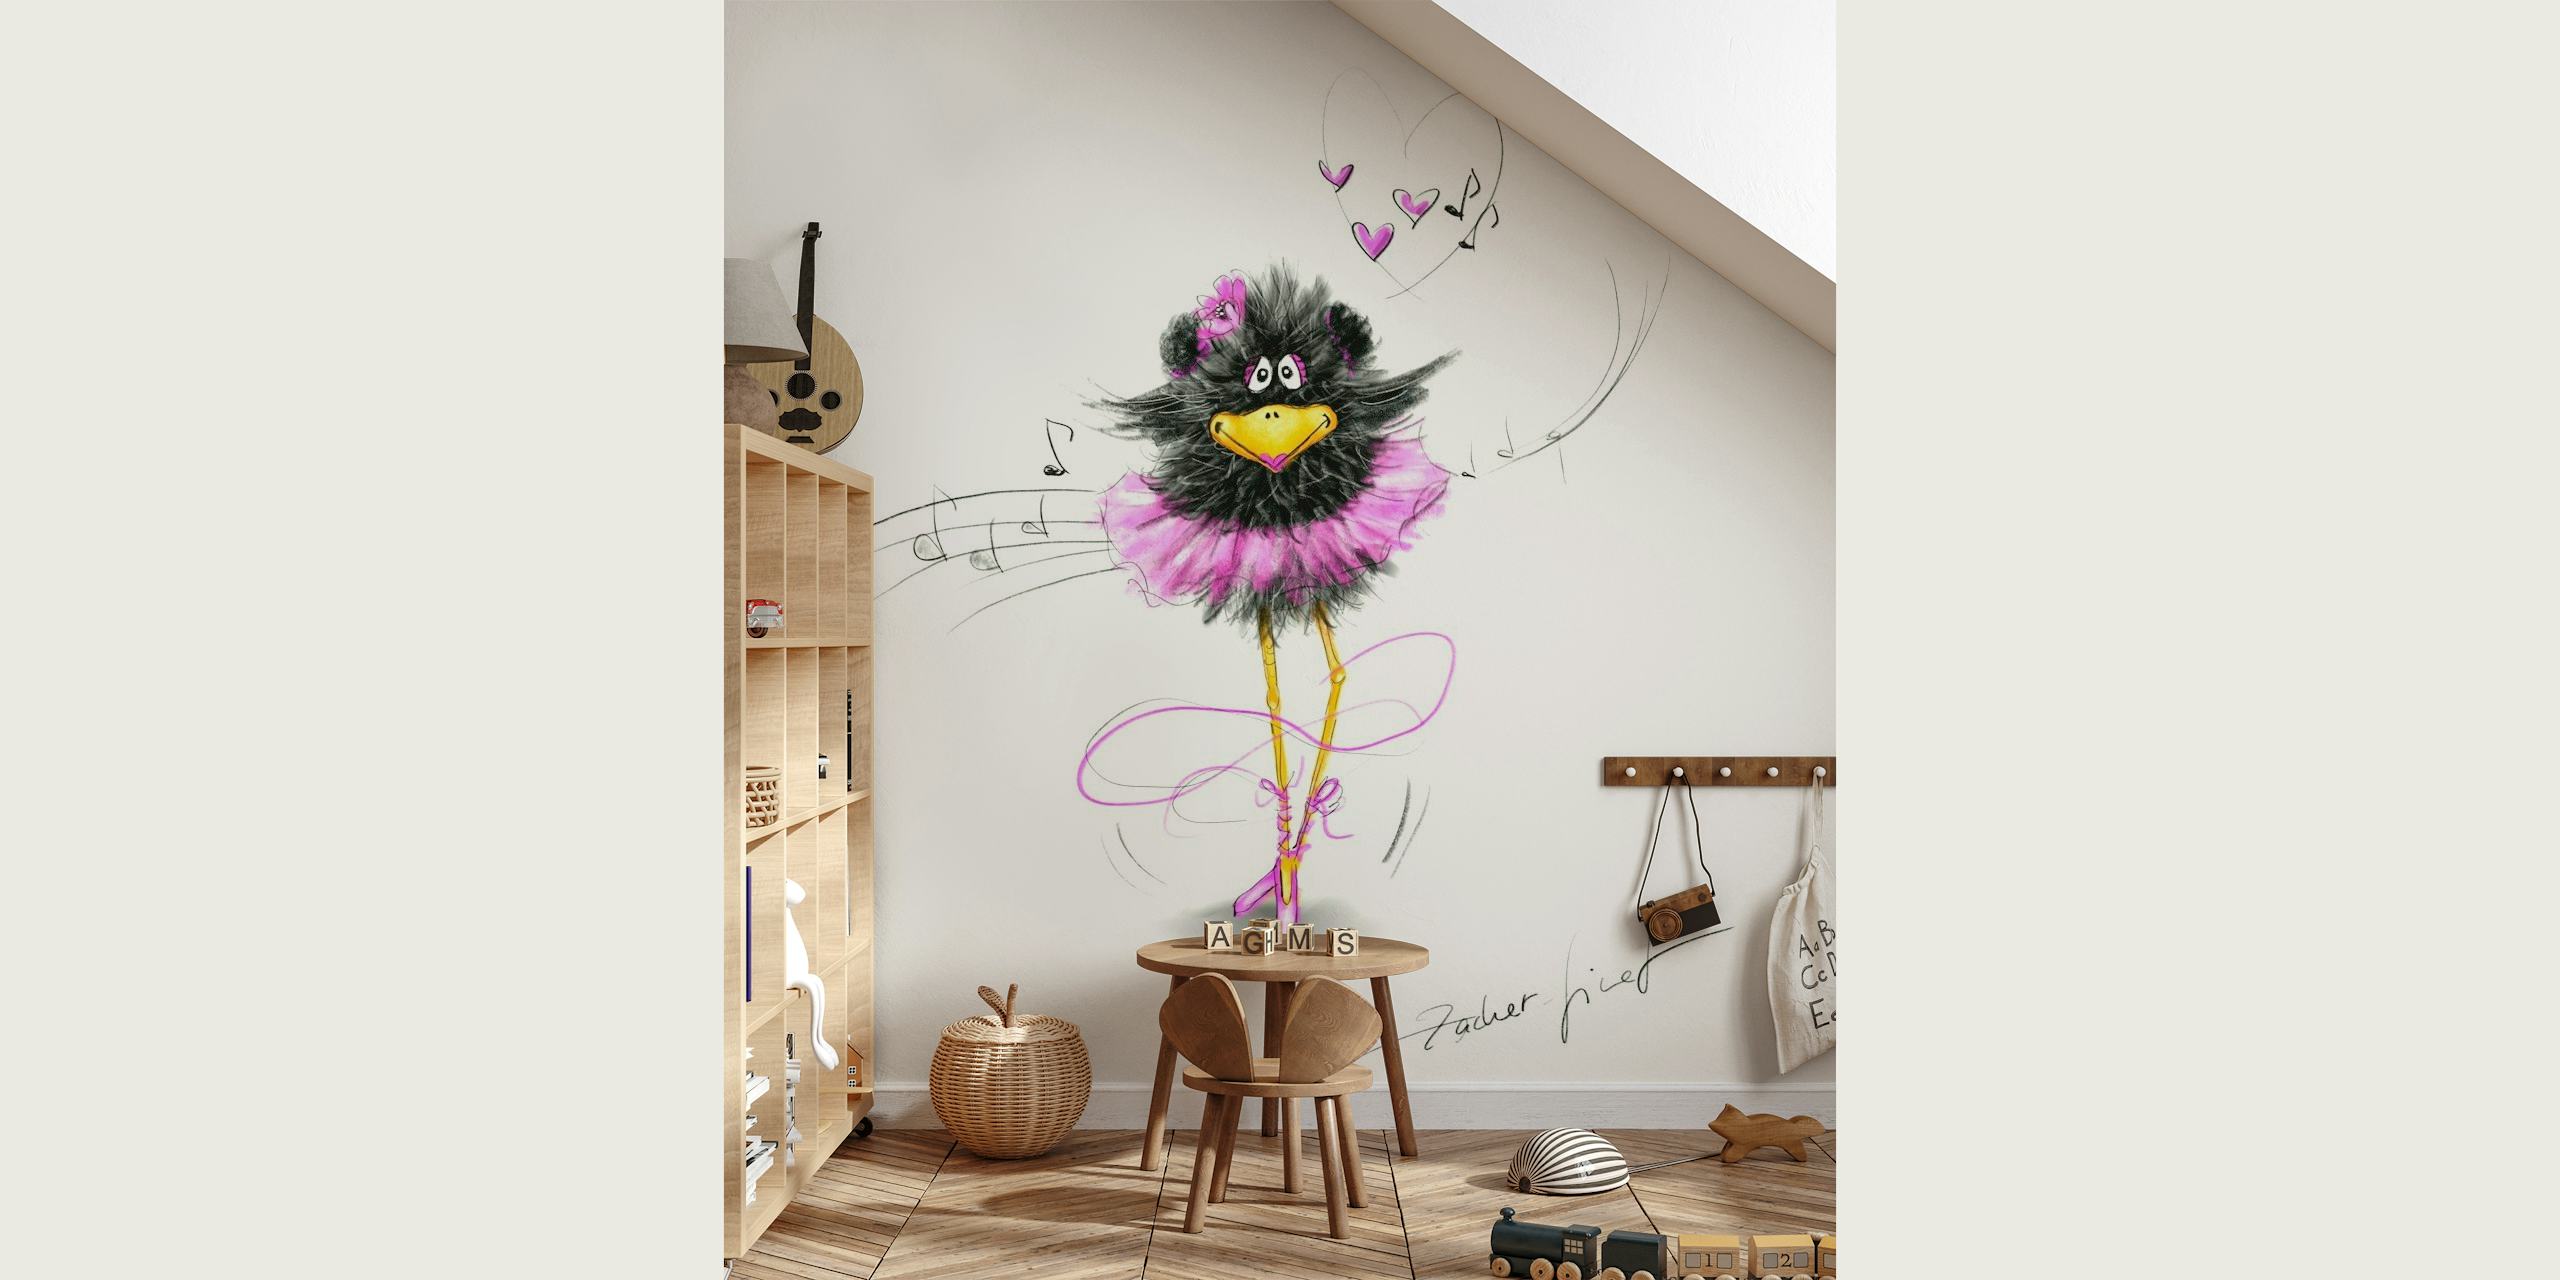 Animated raven ballerina in pink tutu dancing with hearts and music notes illustration.